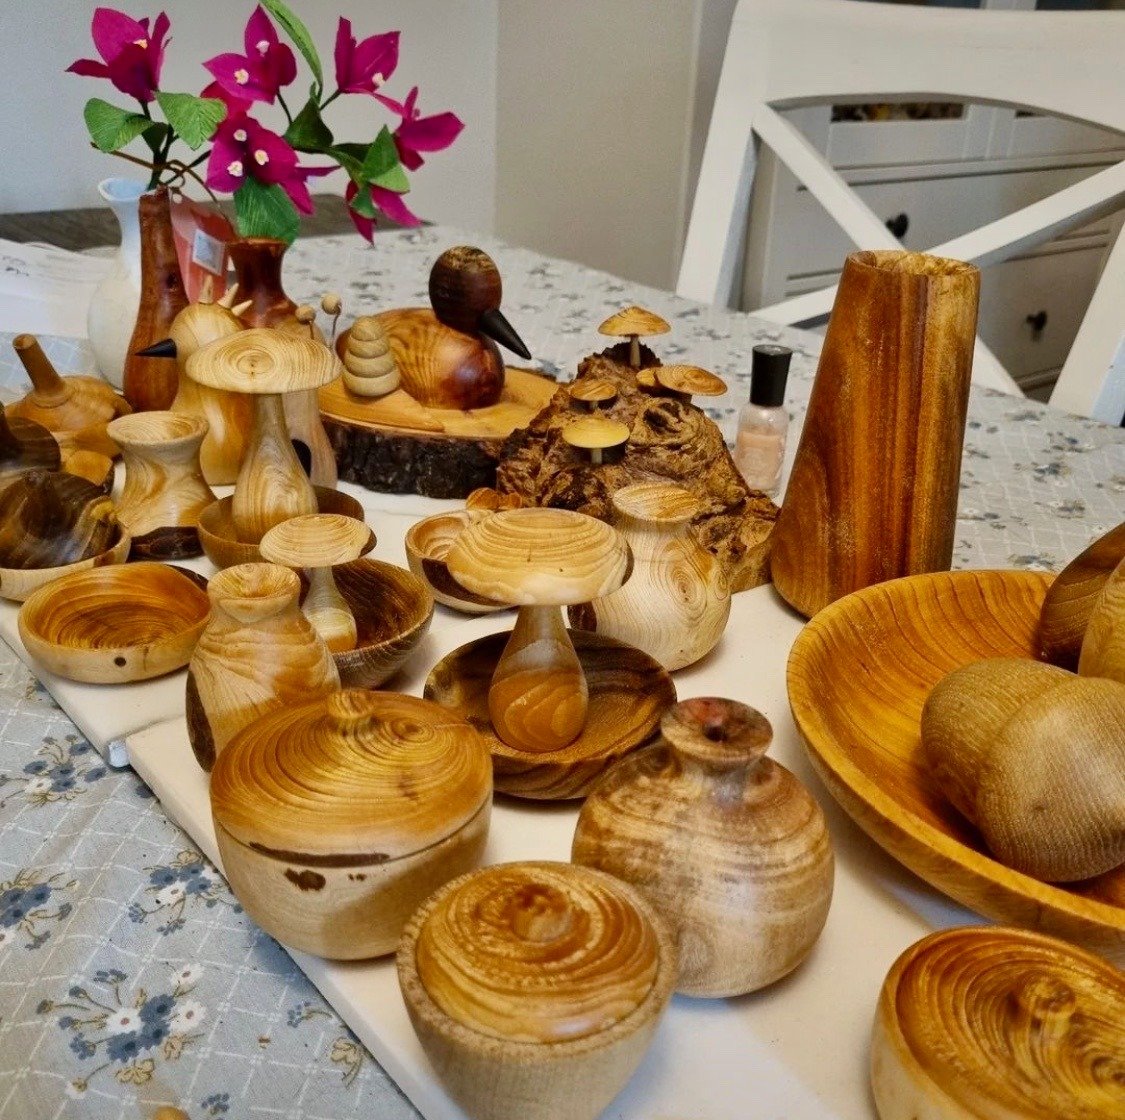 &quot;Slowly but surely getting my items assembled and ready to go to the Botanic Beauty exhibition at the Noel Lothian building in the Adelaide Botanic Garden [Park 11] on May 17-19,&quot; writes @js_woodturning5. 

#adelaideparklands #picoftheday📷